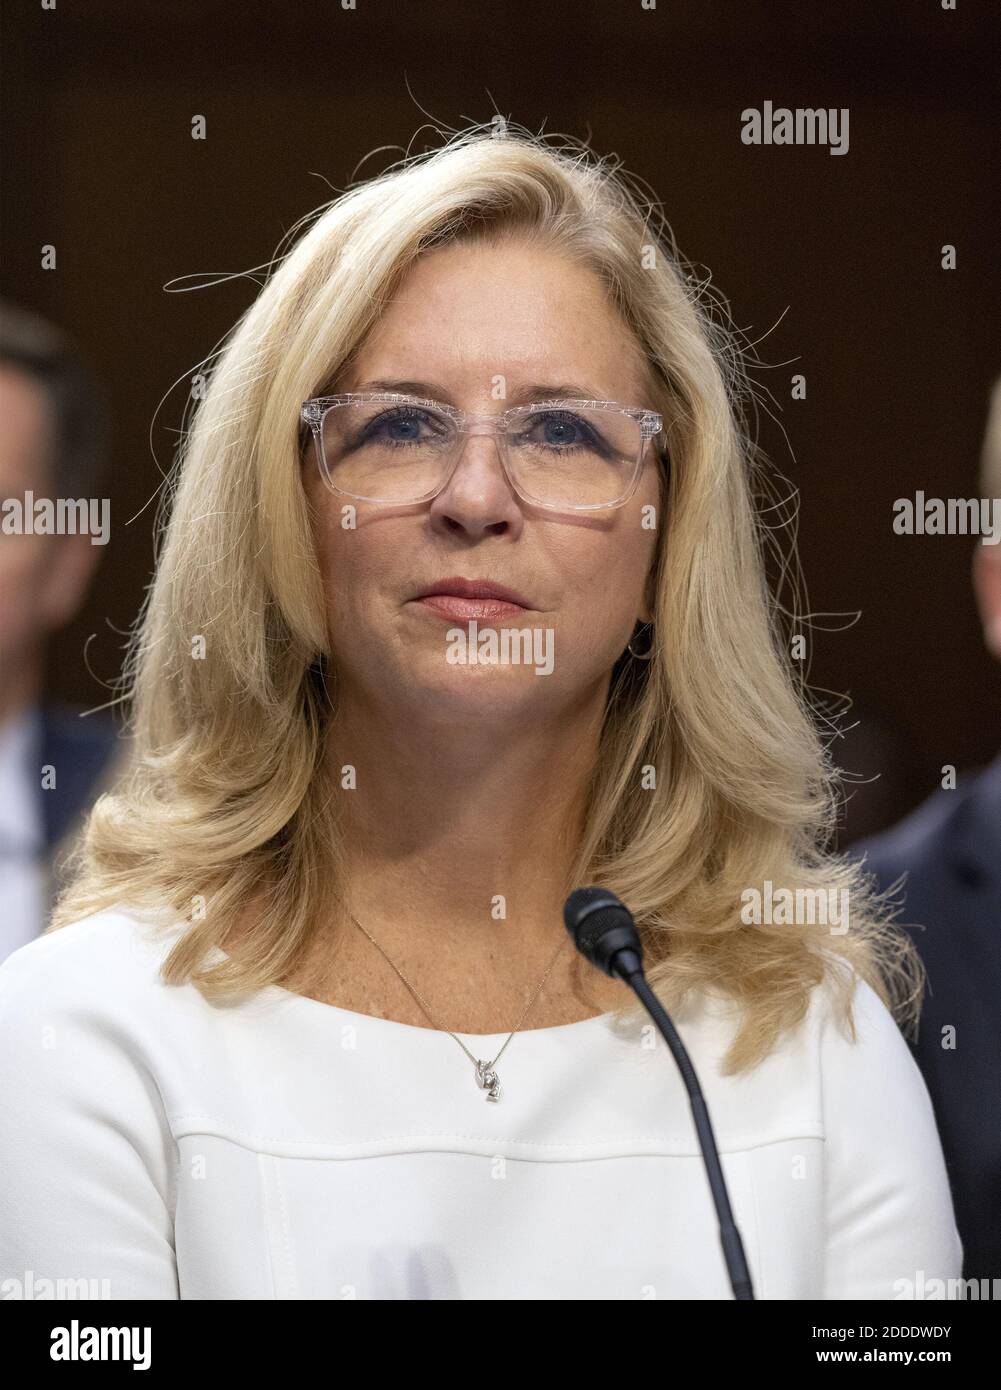 Ellen E. McCarthy testifies before the United States Senate Select Committee on Intelligence on her nomination to be an Assistant Secretary of State (Intelligence and Research), on Capitol Hill in Washington, DC, USA, on Wednesday, July 25, 2018. Photo by Ron Sachs/CNP/ABACAPRESS.COM Stock Photo